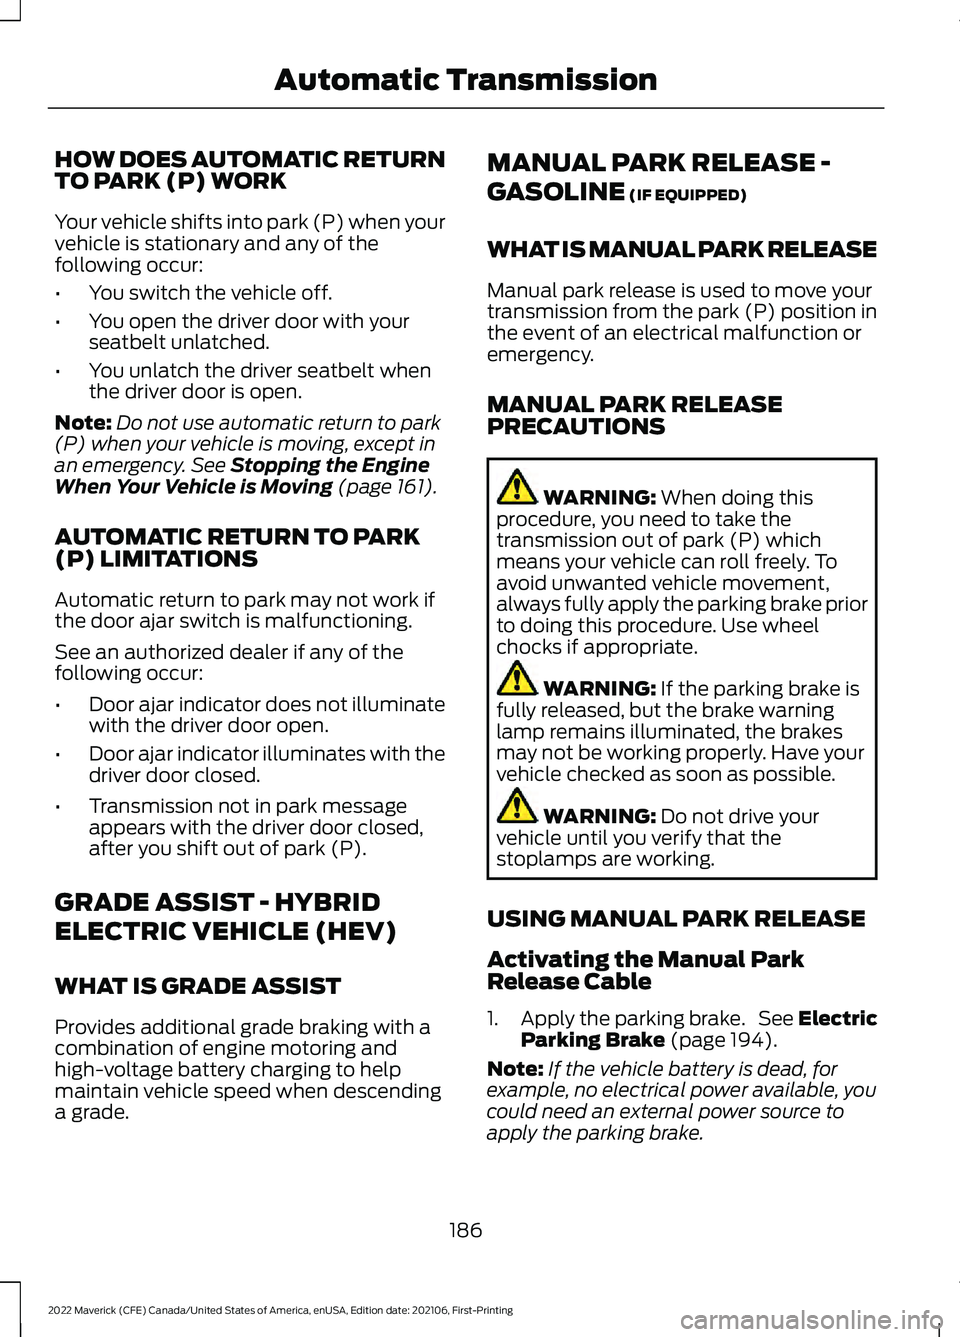 FORD MAVERICK 2022 User Guide HOW DOES AUTOMATIC RETURN
TO PARK (P) WORK
Your vehicle shifts into park (P) when your
vehicle is stationary and any of the
following occur:
•
You switch the vehicle off.
• You open the driver doo